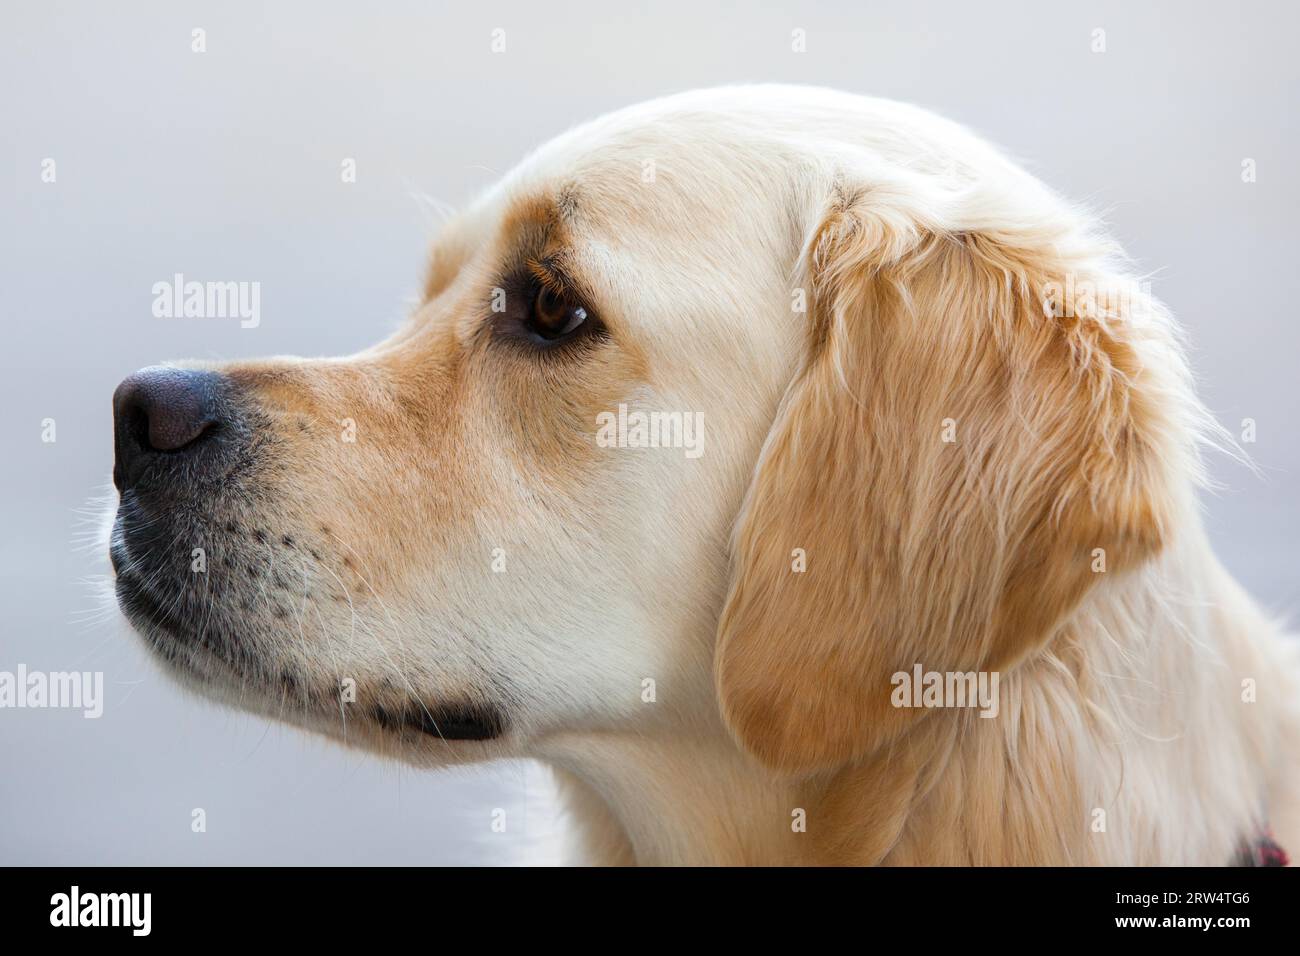 A labrador dog looks away towards its owner Stock Photo